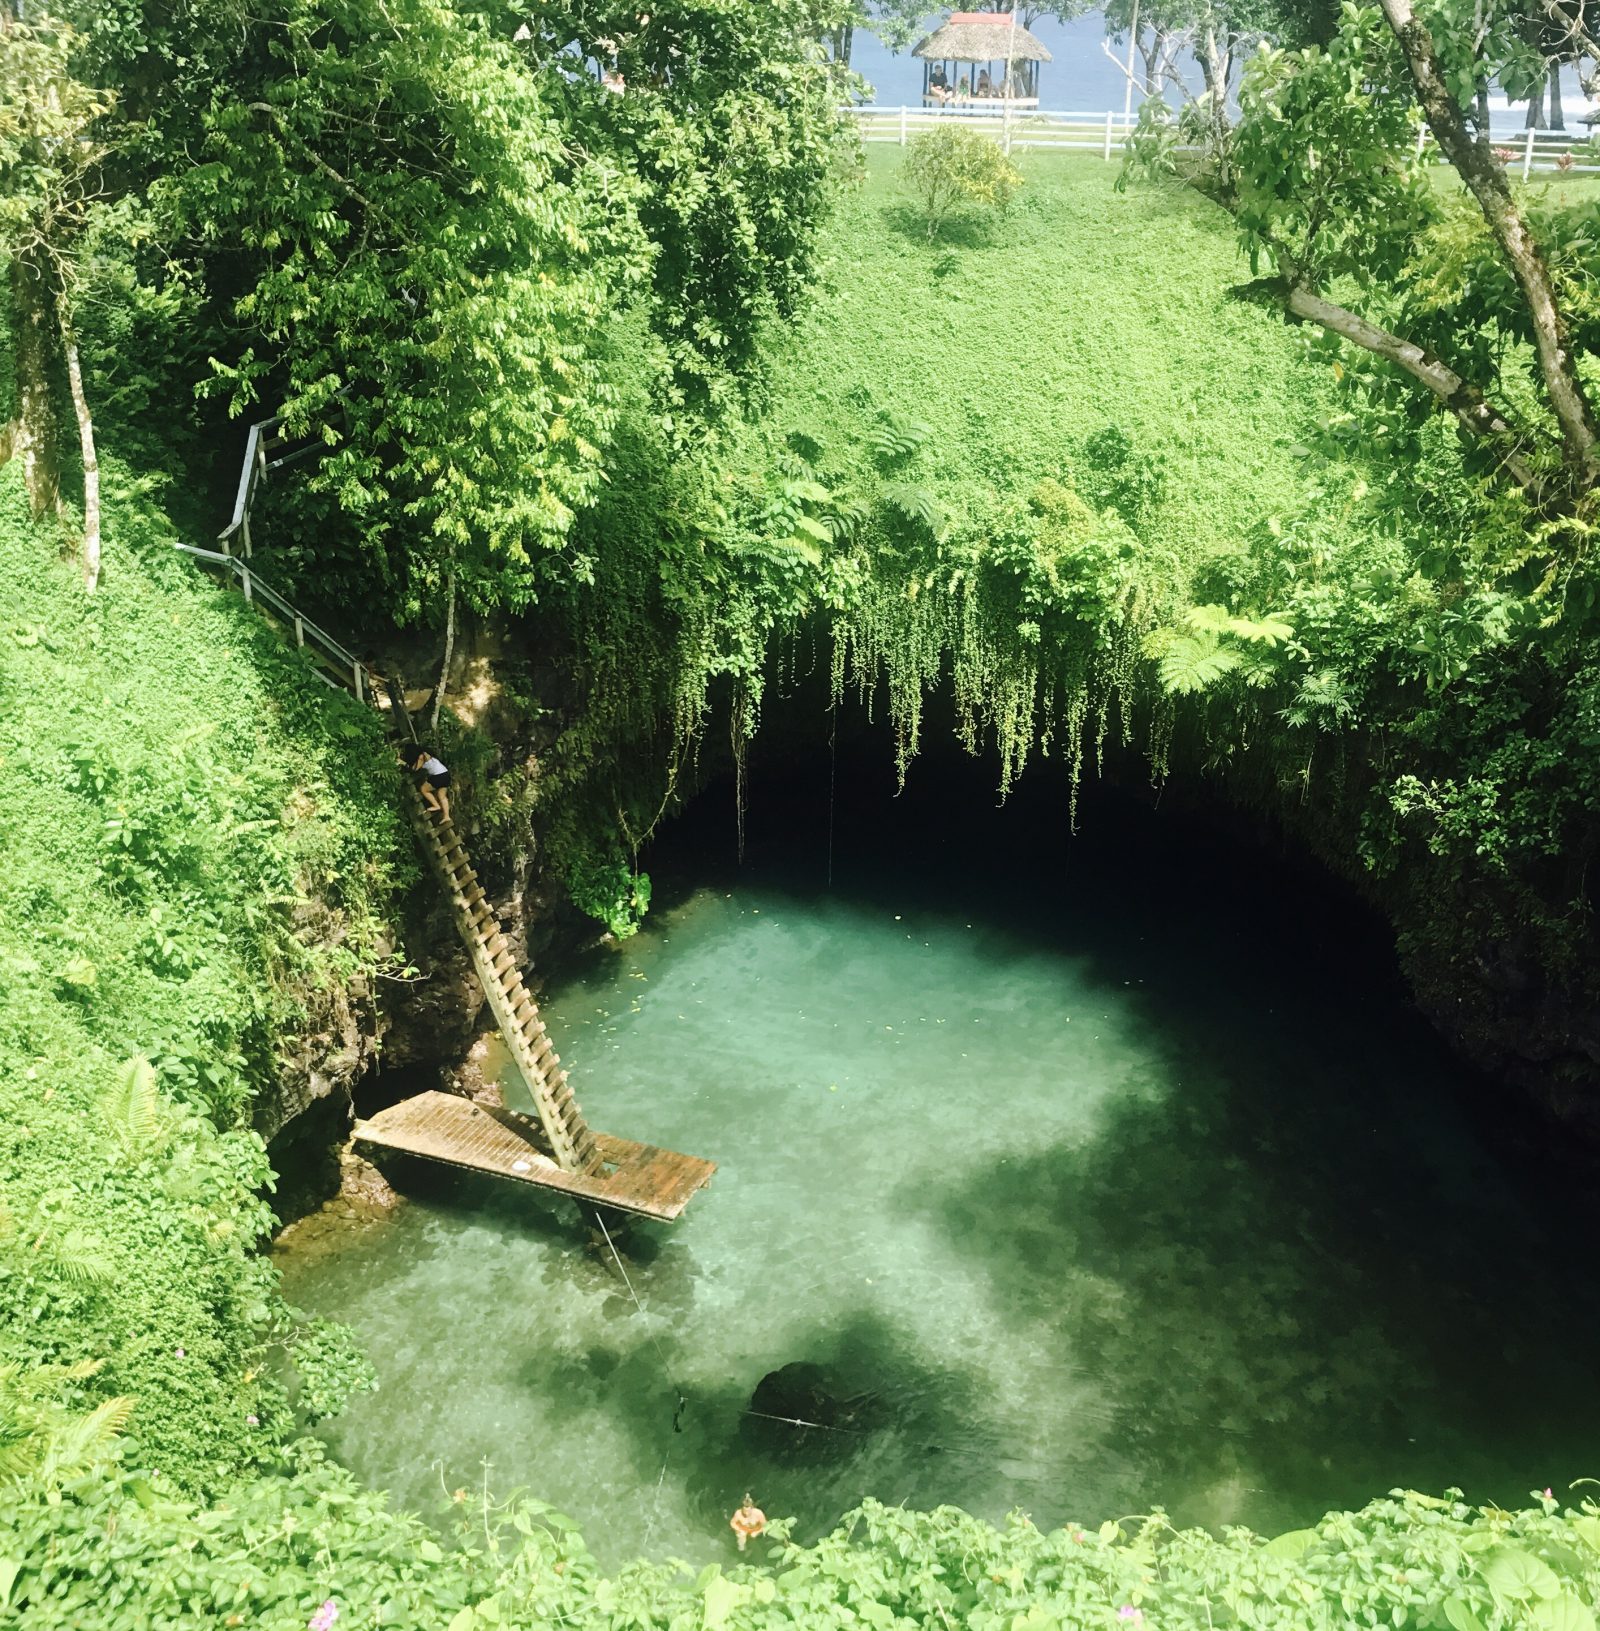 The Sua Ocean Trench at the end of the world